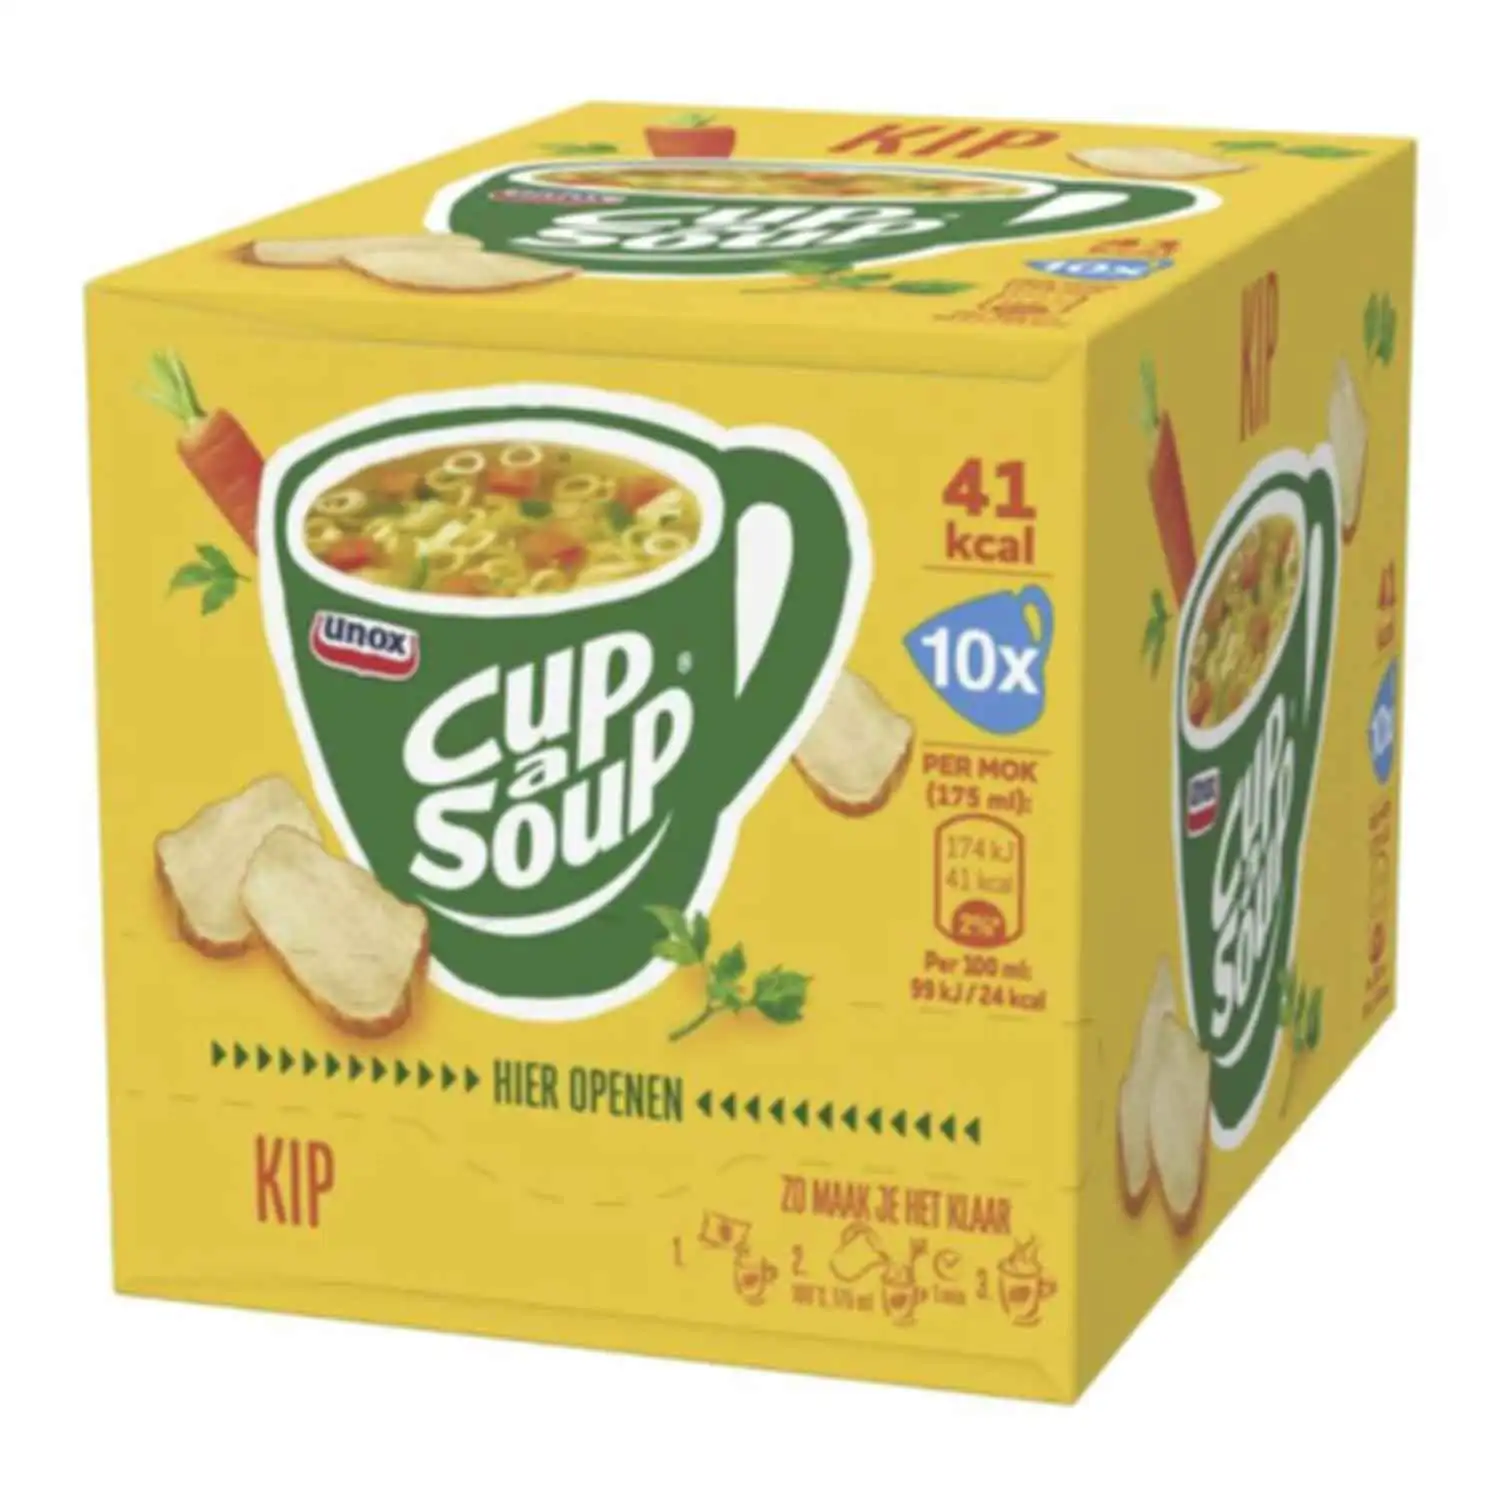 10x Cup a Soup poulet 12g - Buy at Real Tobacco